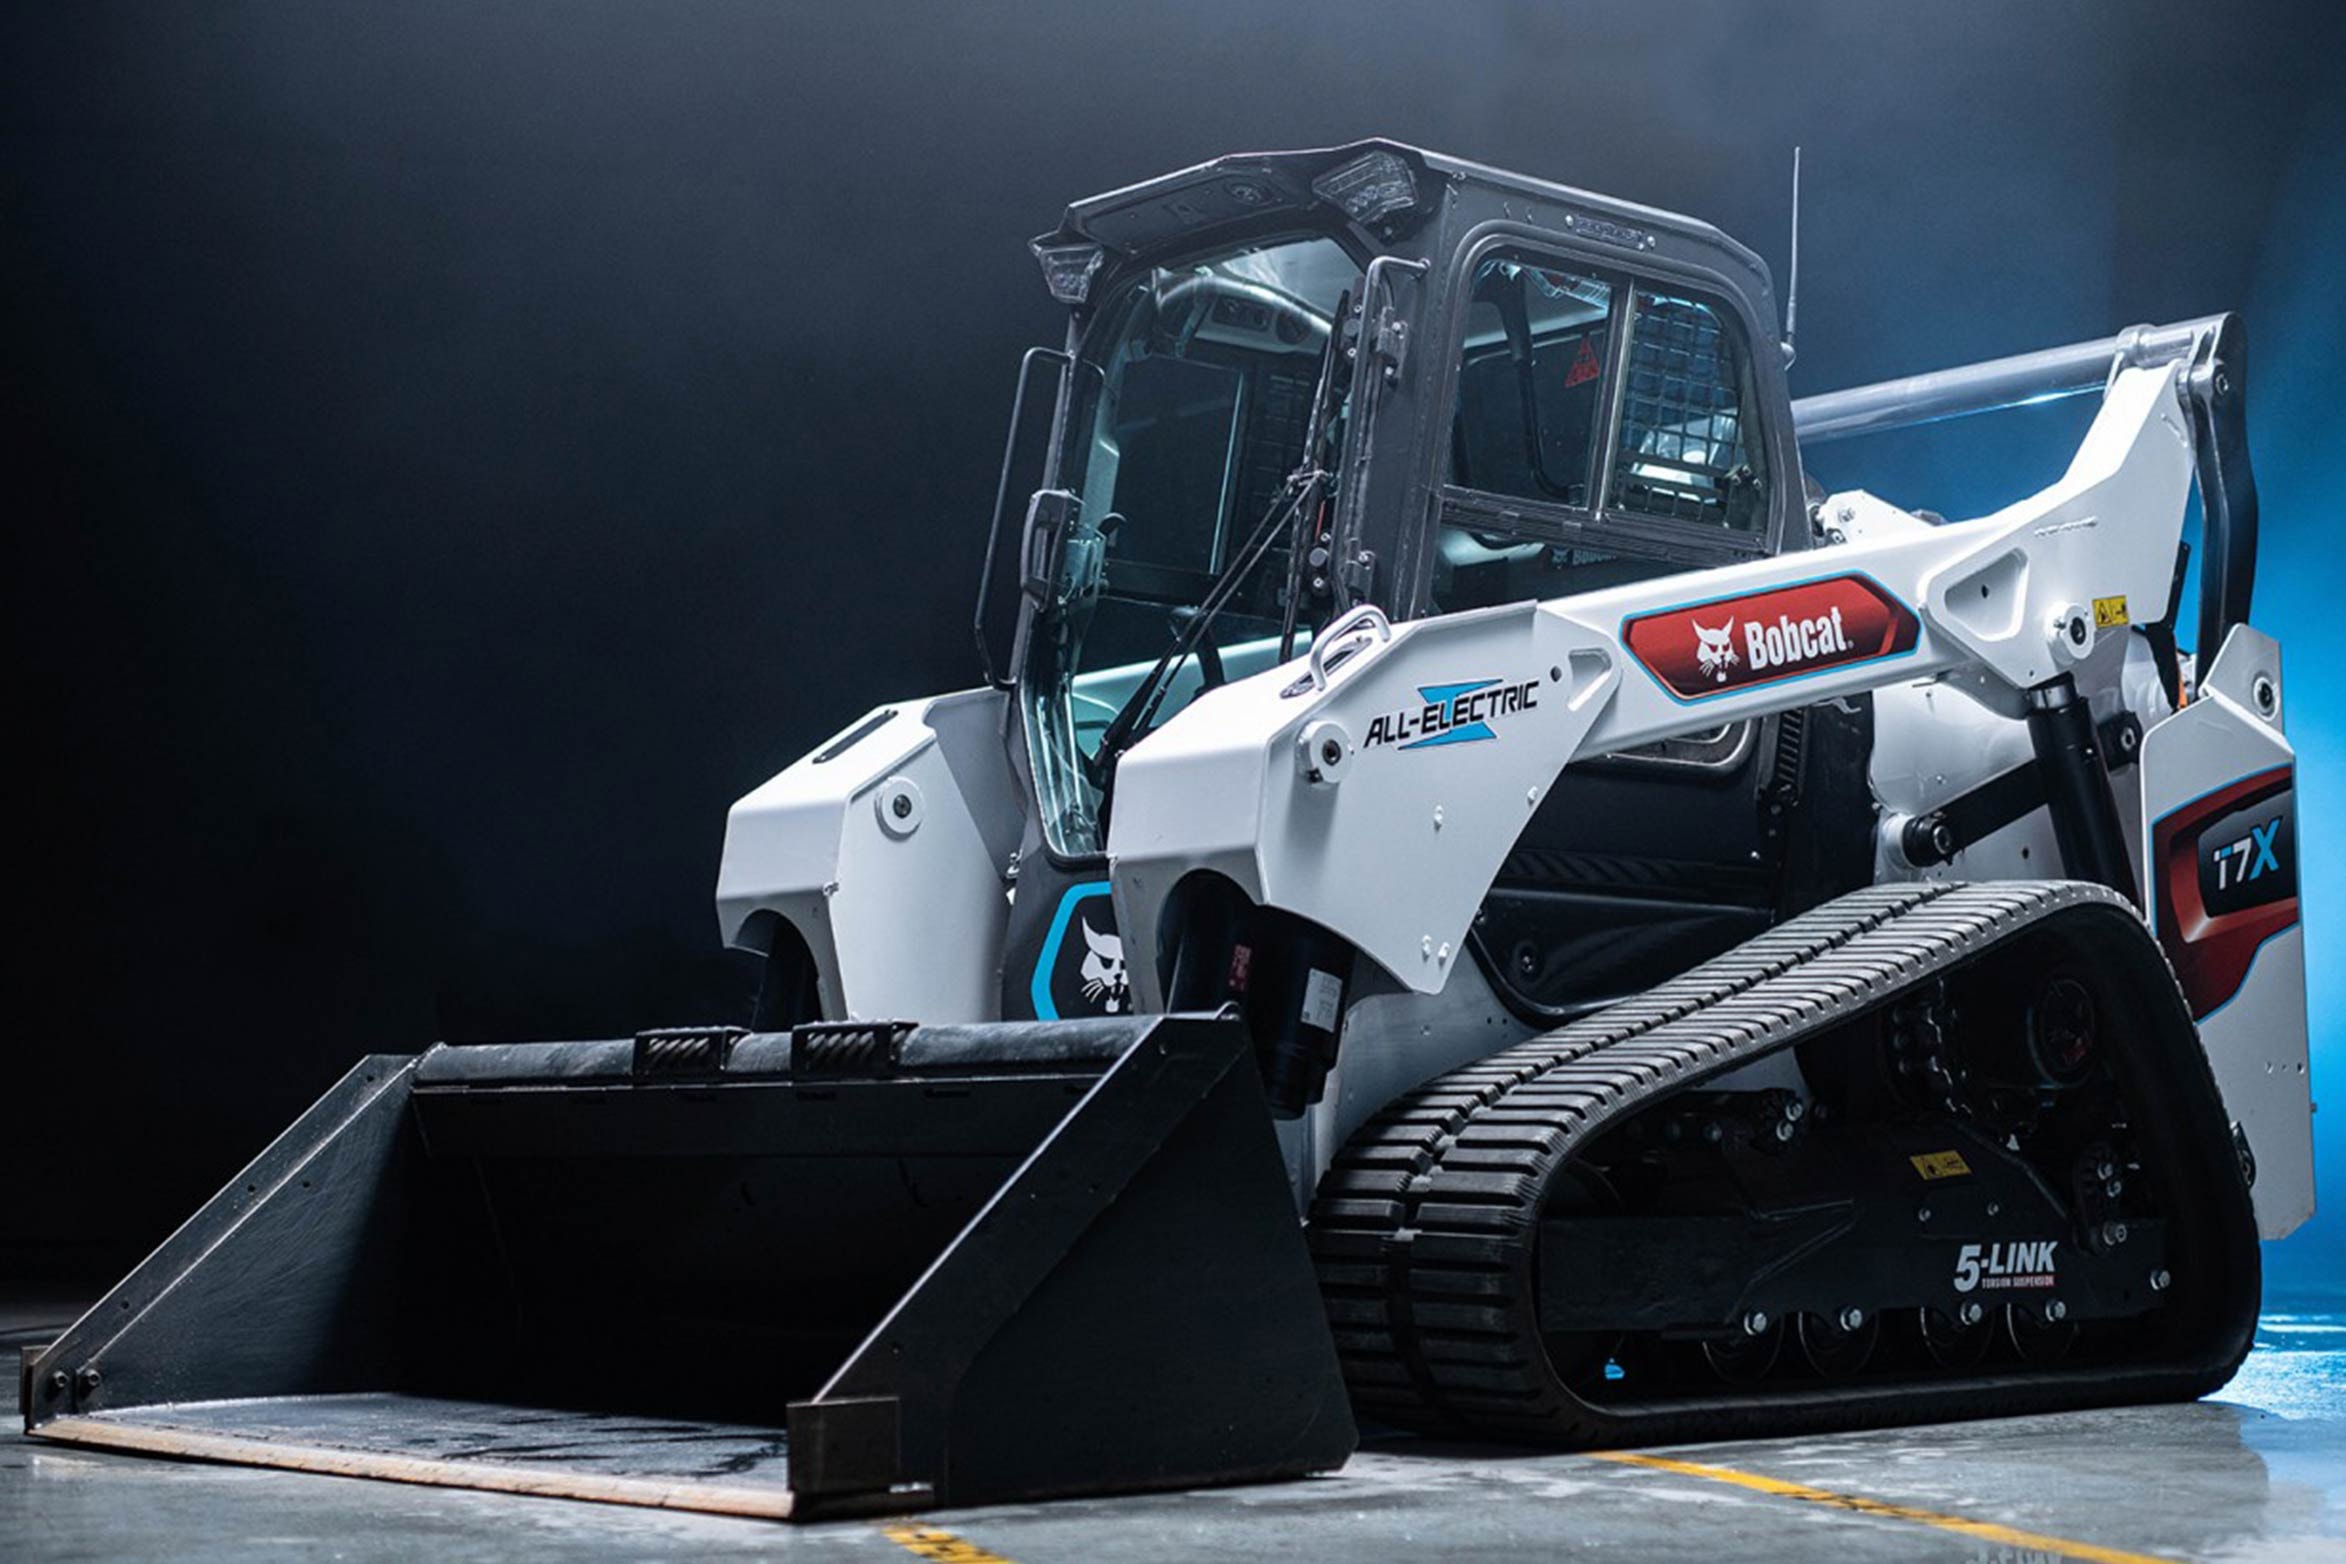 Bobcat T7X Compact Track Loader 2022 CES Innovation Award Winner News sustainability eco farming construction repair 